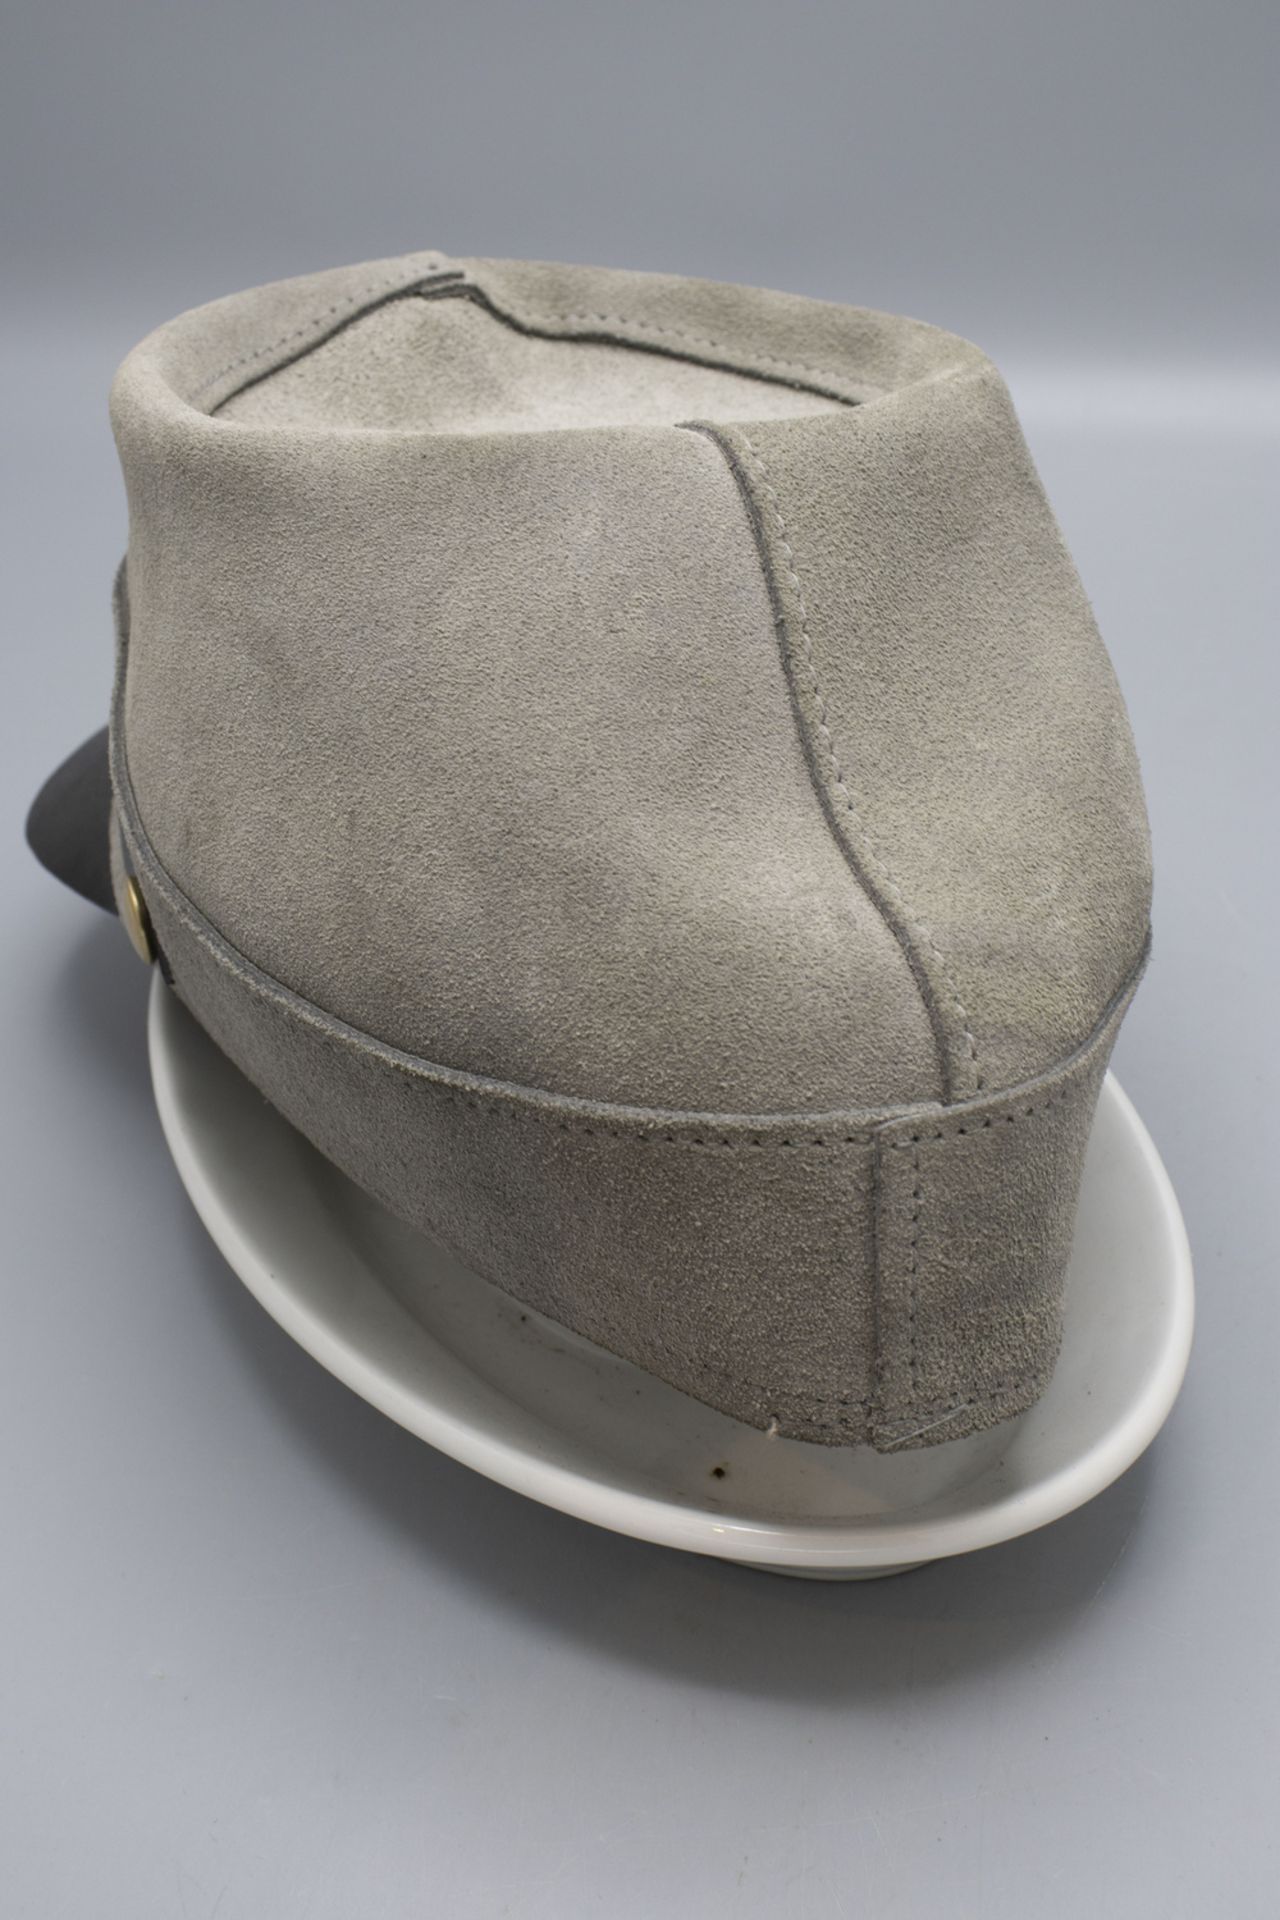 Schirmmütze / A peaked cap, Hat Quaters USA - Image 3 of 5